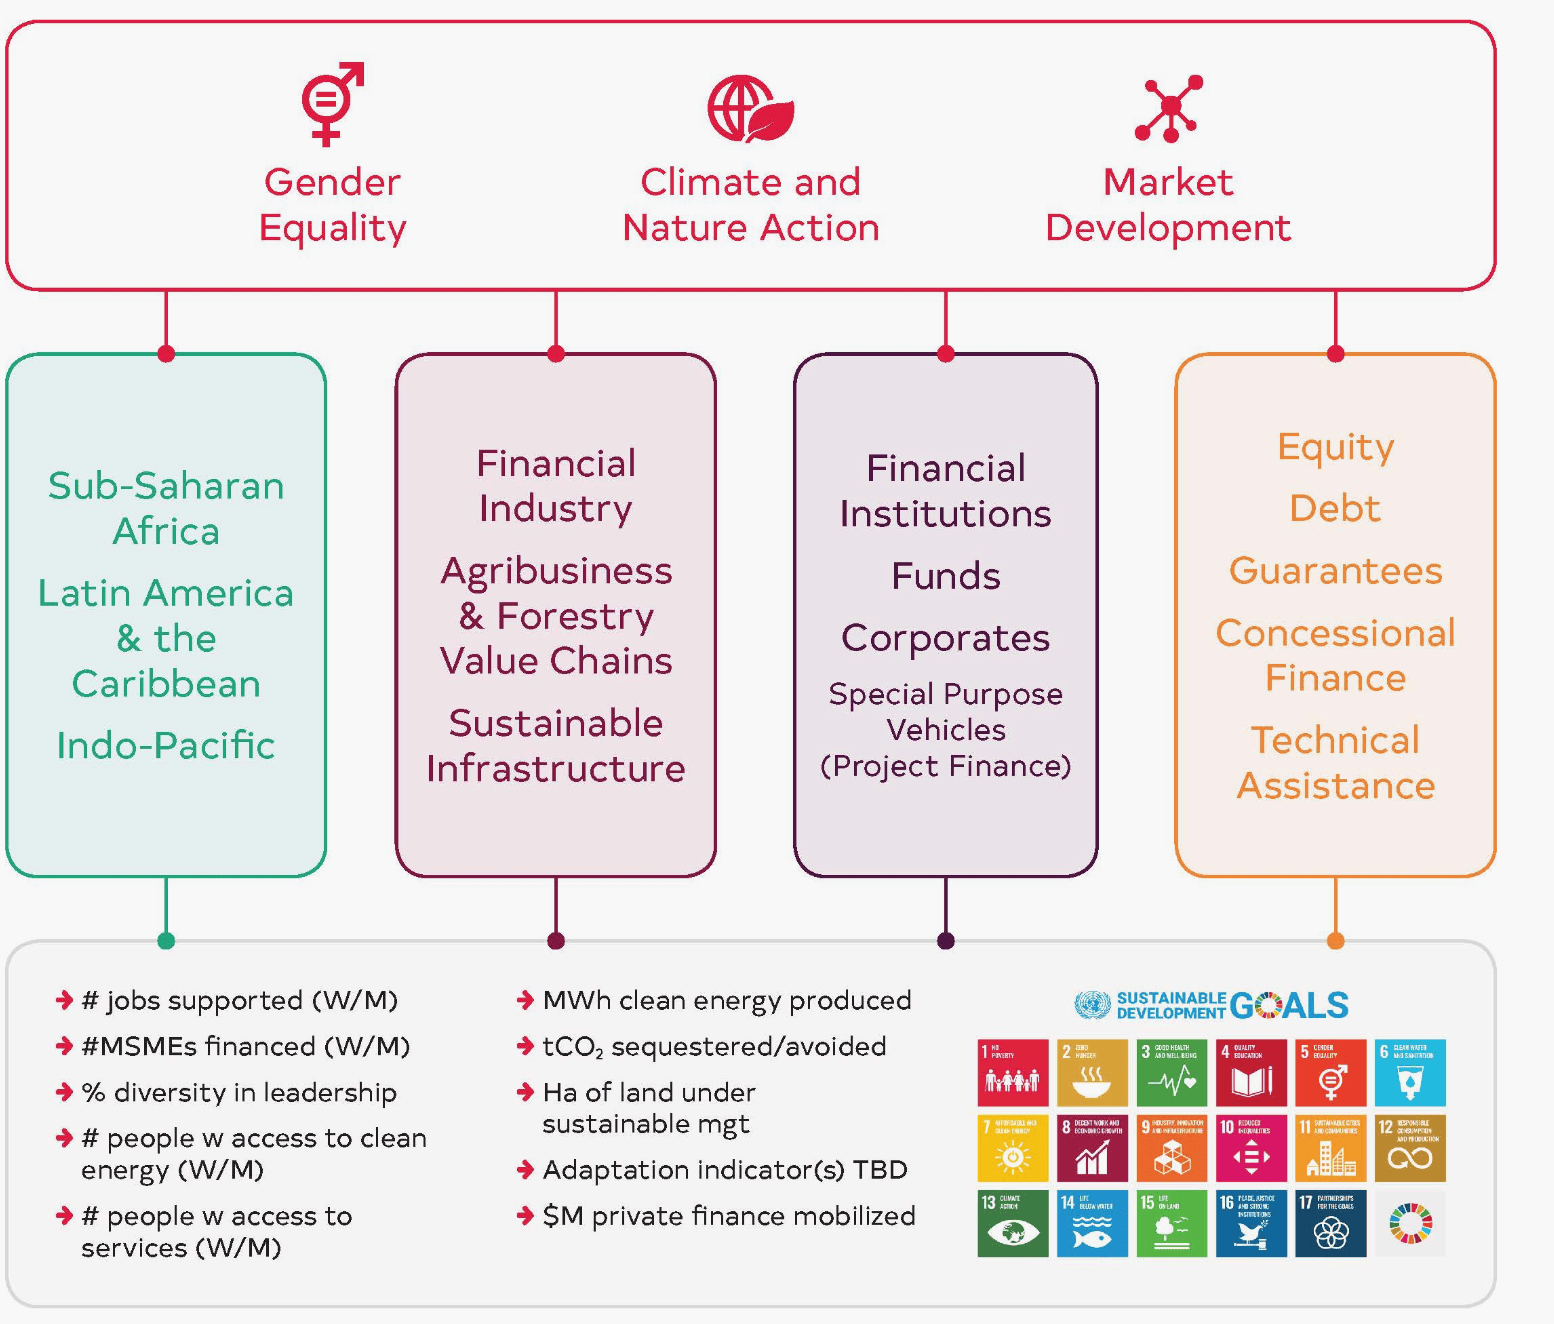 A graphic summarizing FinDev Canada’s 2023 to 2027 corporate plan, which focuses on women’s economic empowerment, climate action and market development in the Sub-Saharan Africa, Latin America & the Caribbean, and Indo-Pacific regions.